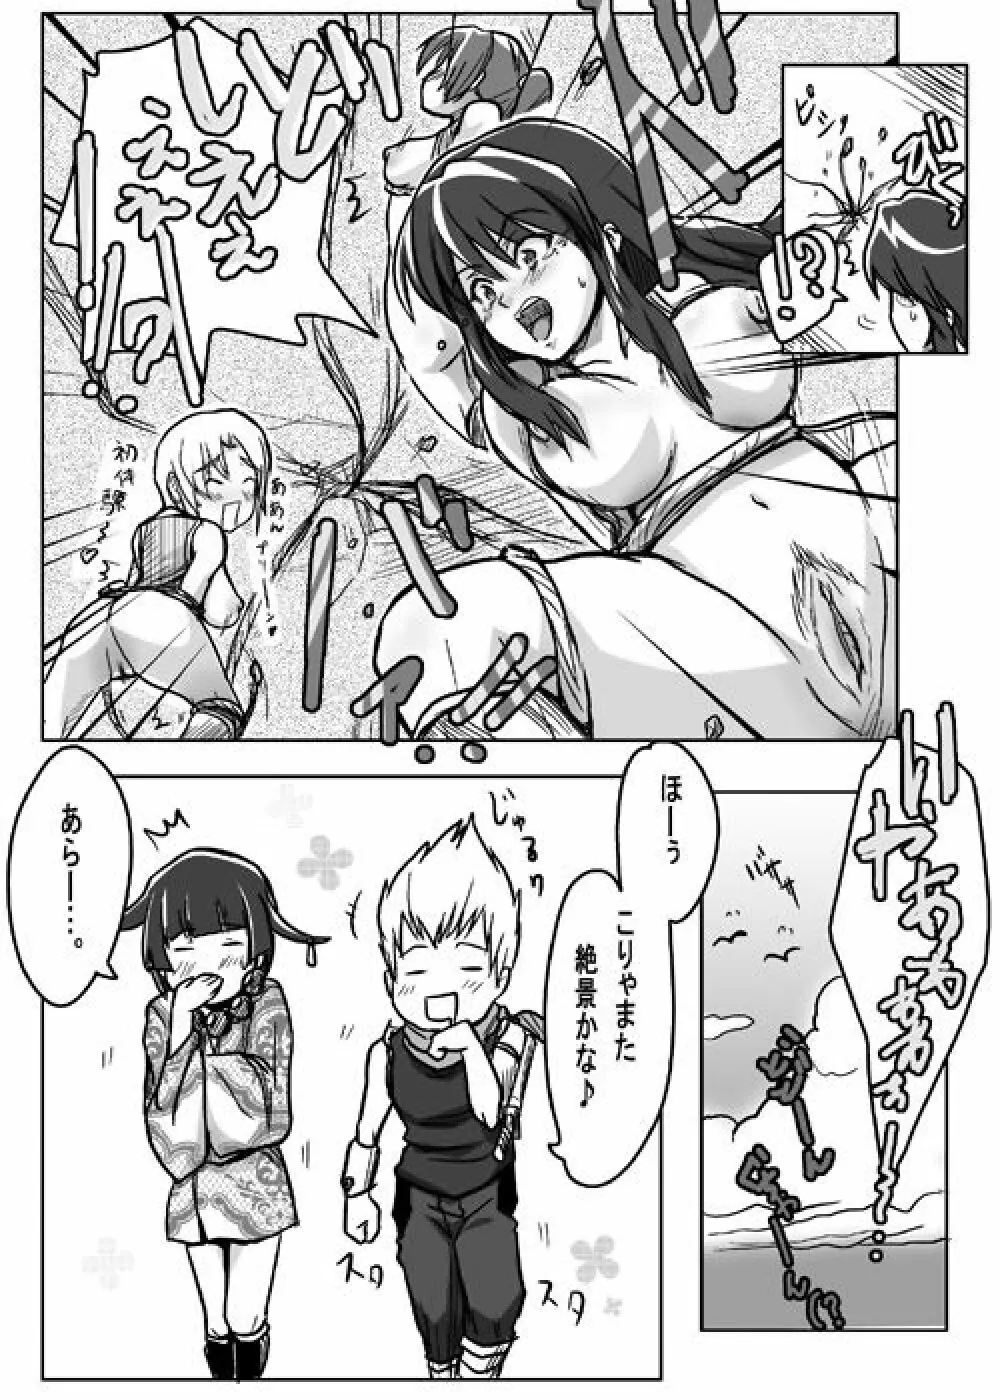 Same-themed manga about kid fighting female ninjas from japanese imageboard. Page.55